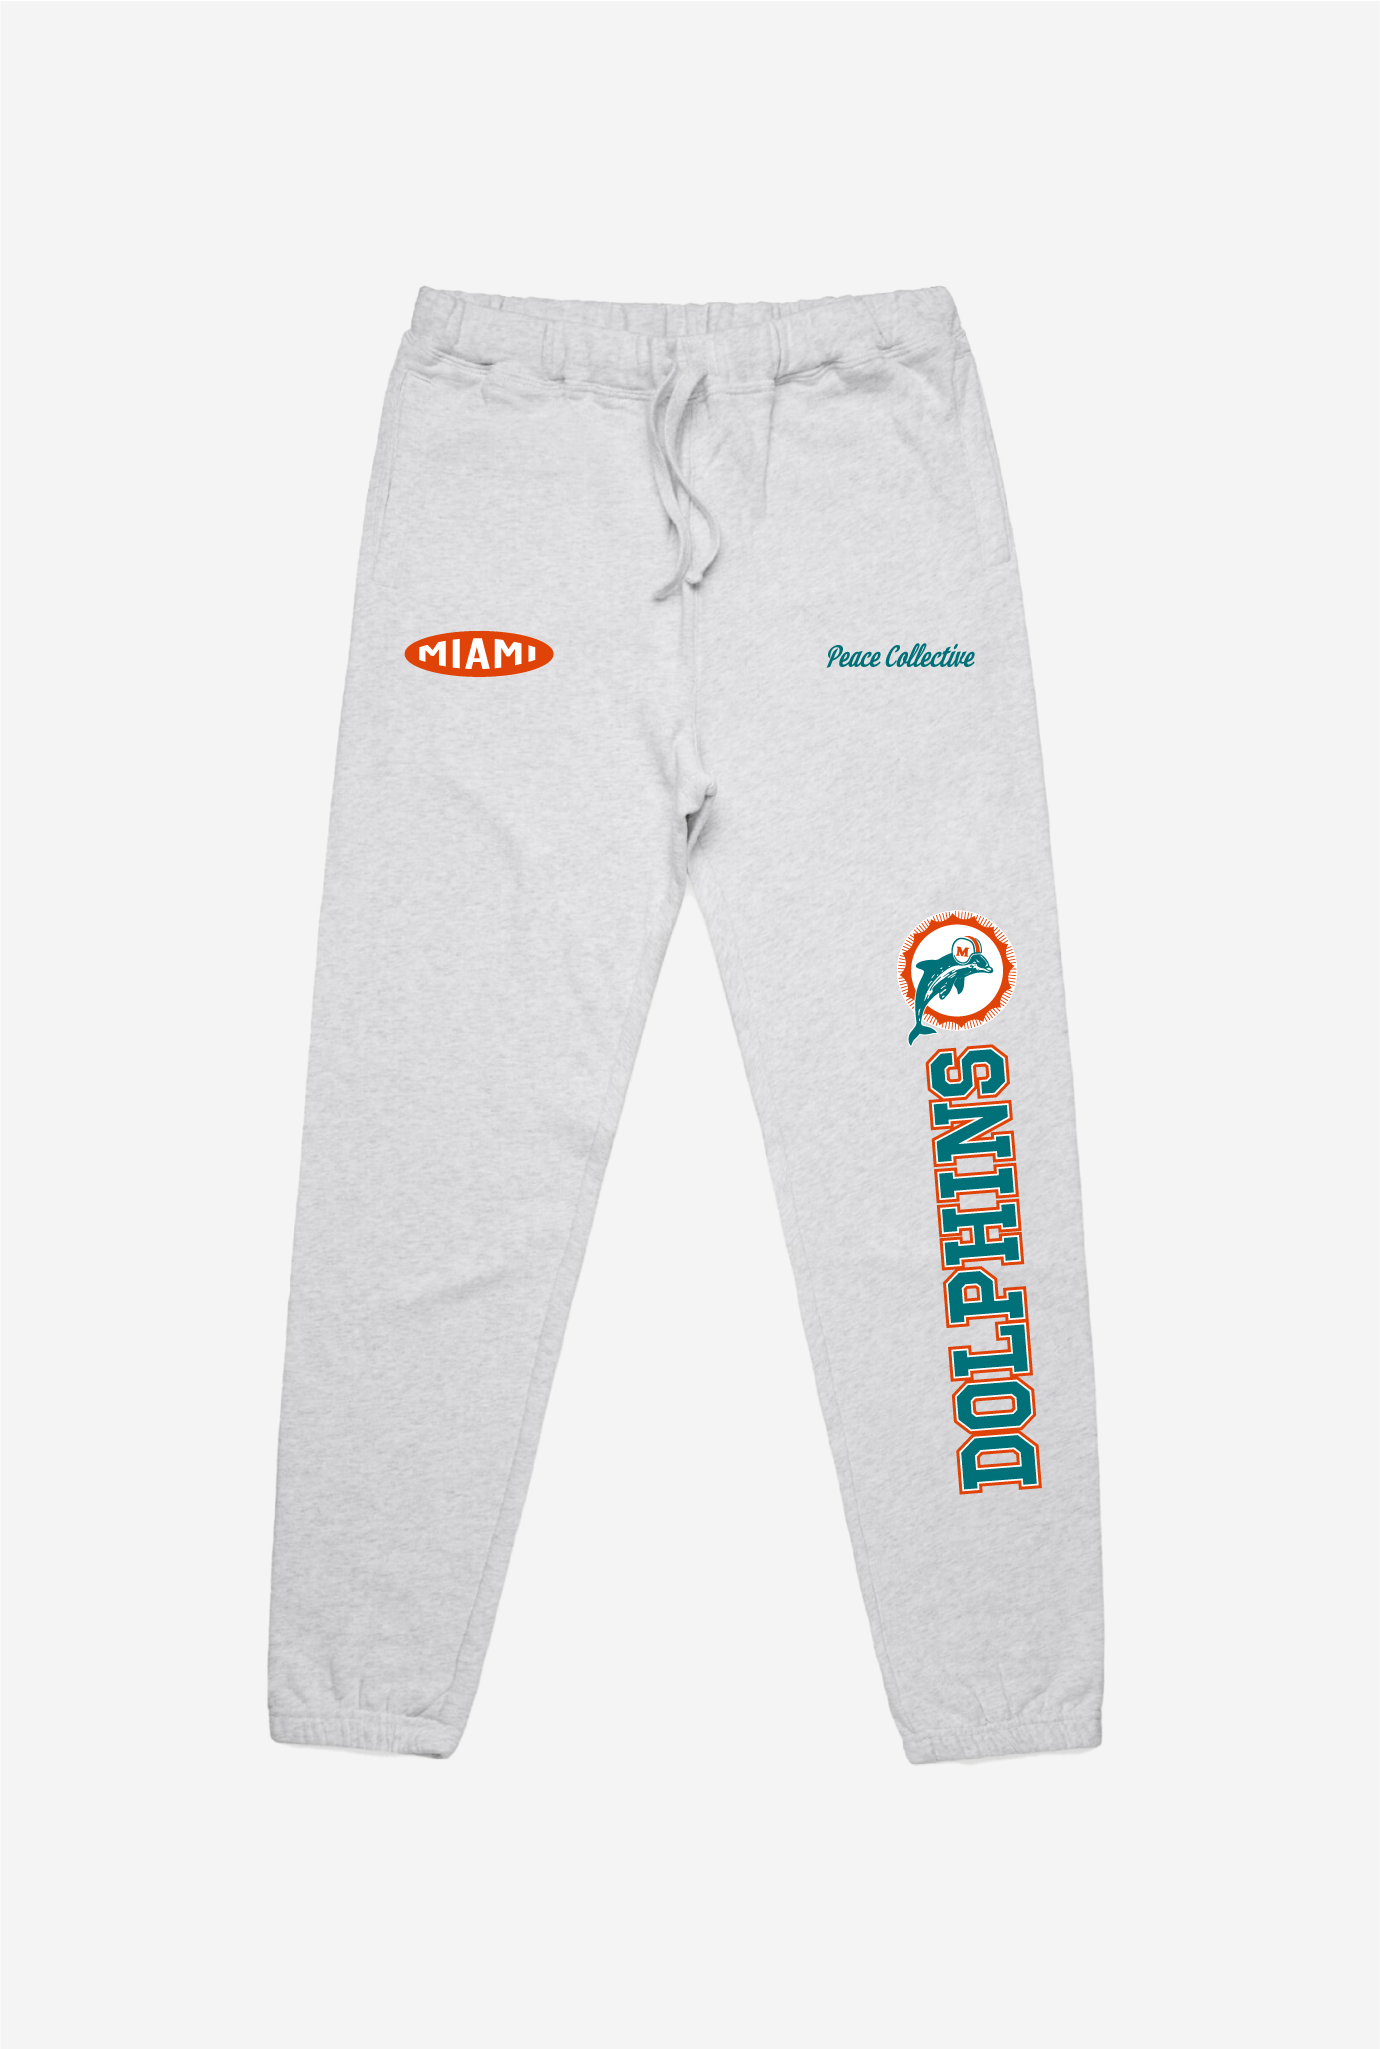 Miami Dolphins Washed Graphic Joggers - Ash